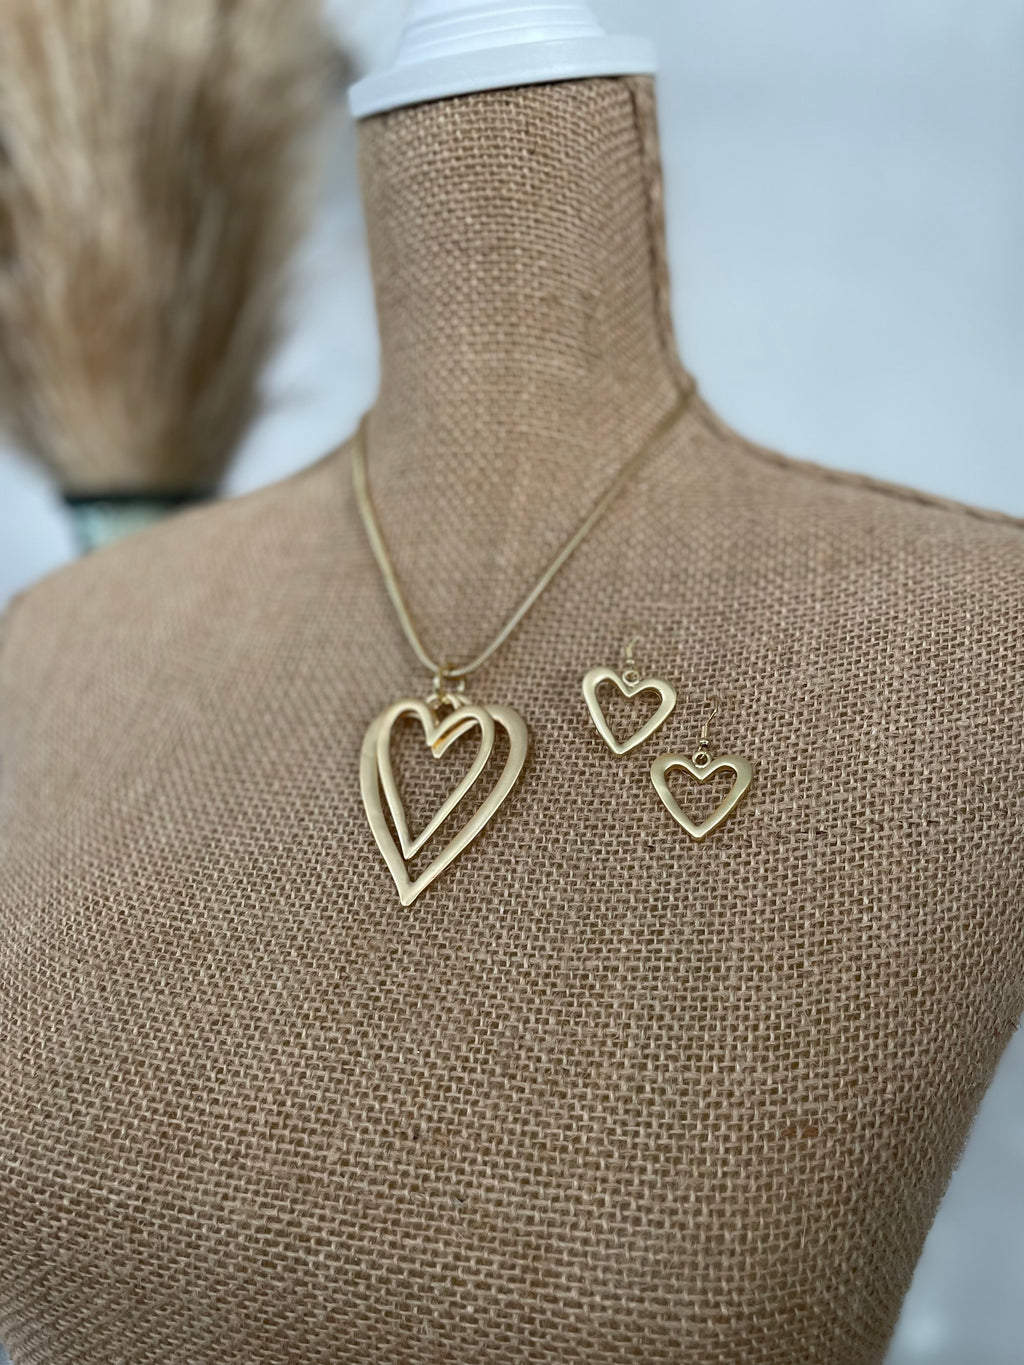 Gold Rope with Heart Charm Necklace and Earing Set